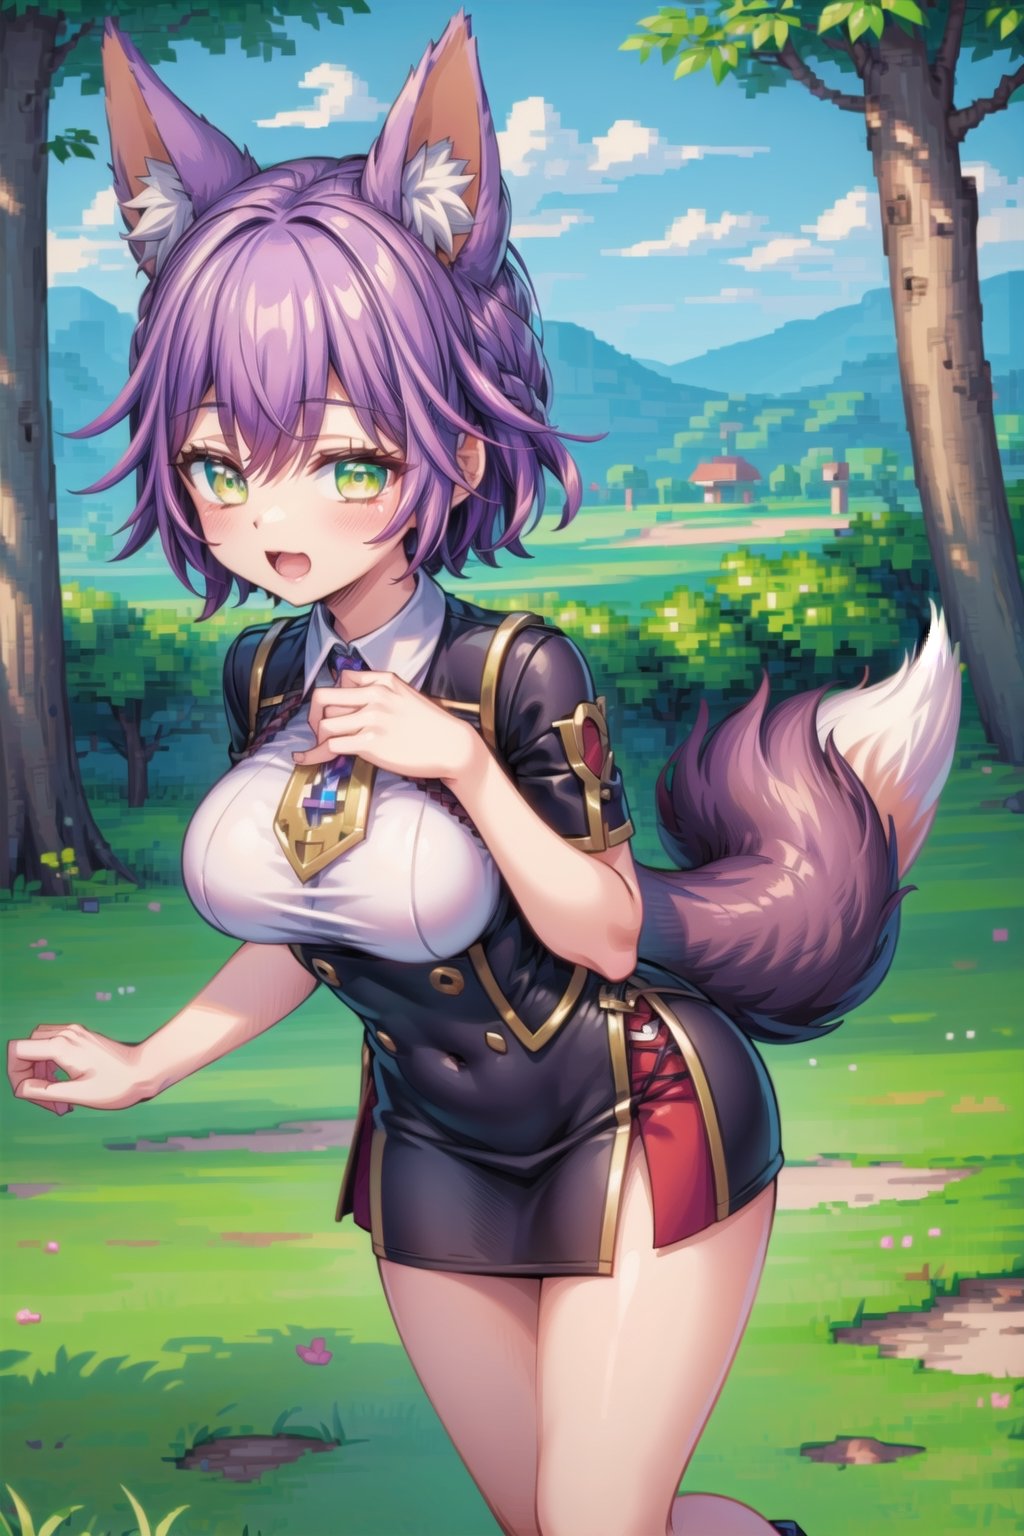 ah1, green, short hairs,fox tail,5_figners, purple_hair,yellow eyes ,lure,large breasts, ah1, perfect,Pixel Art.